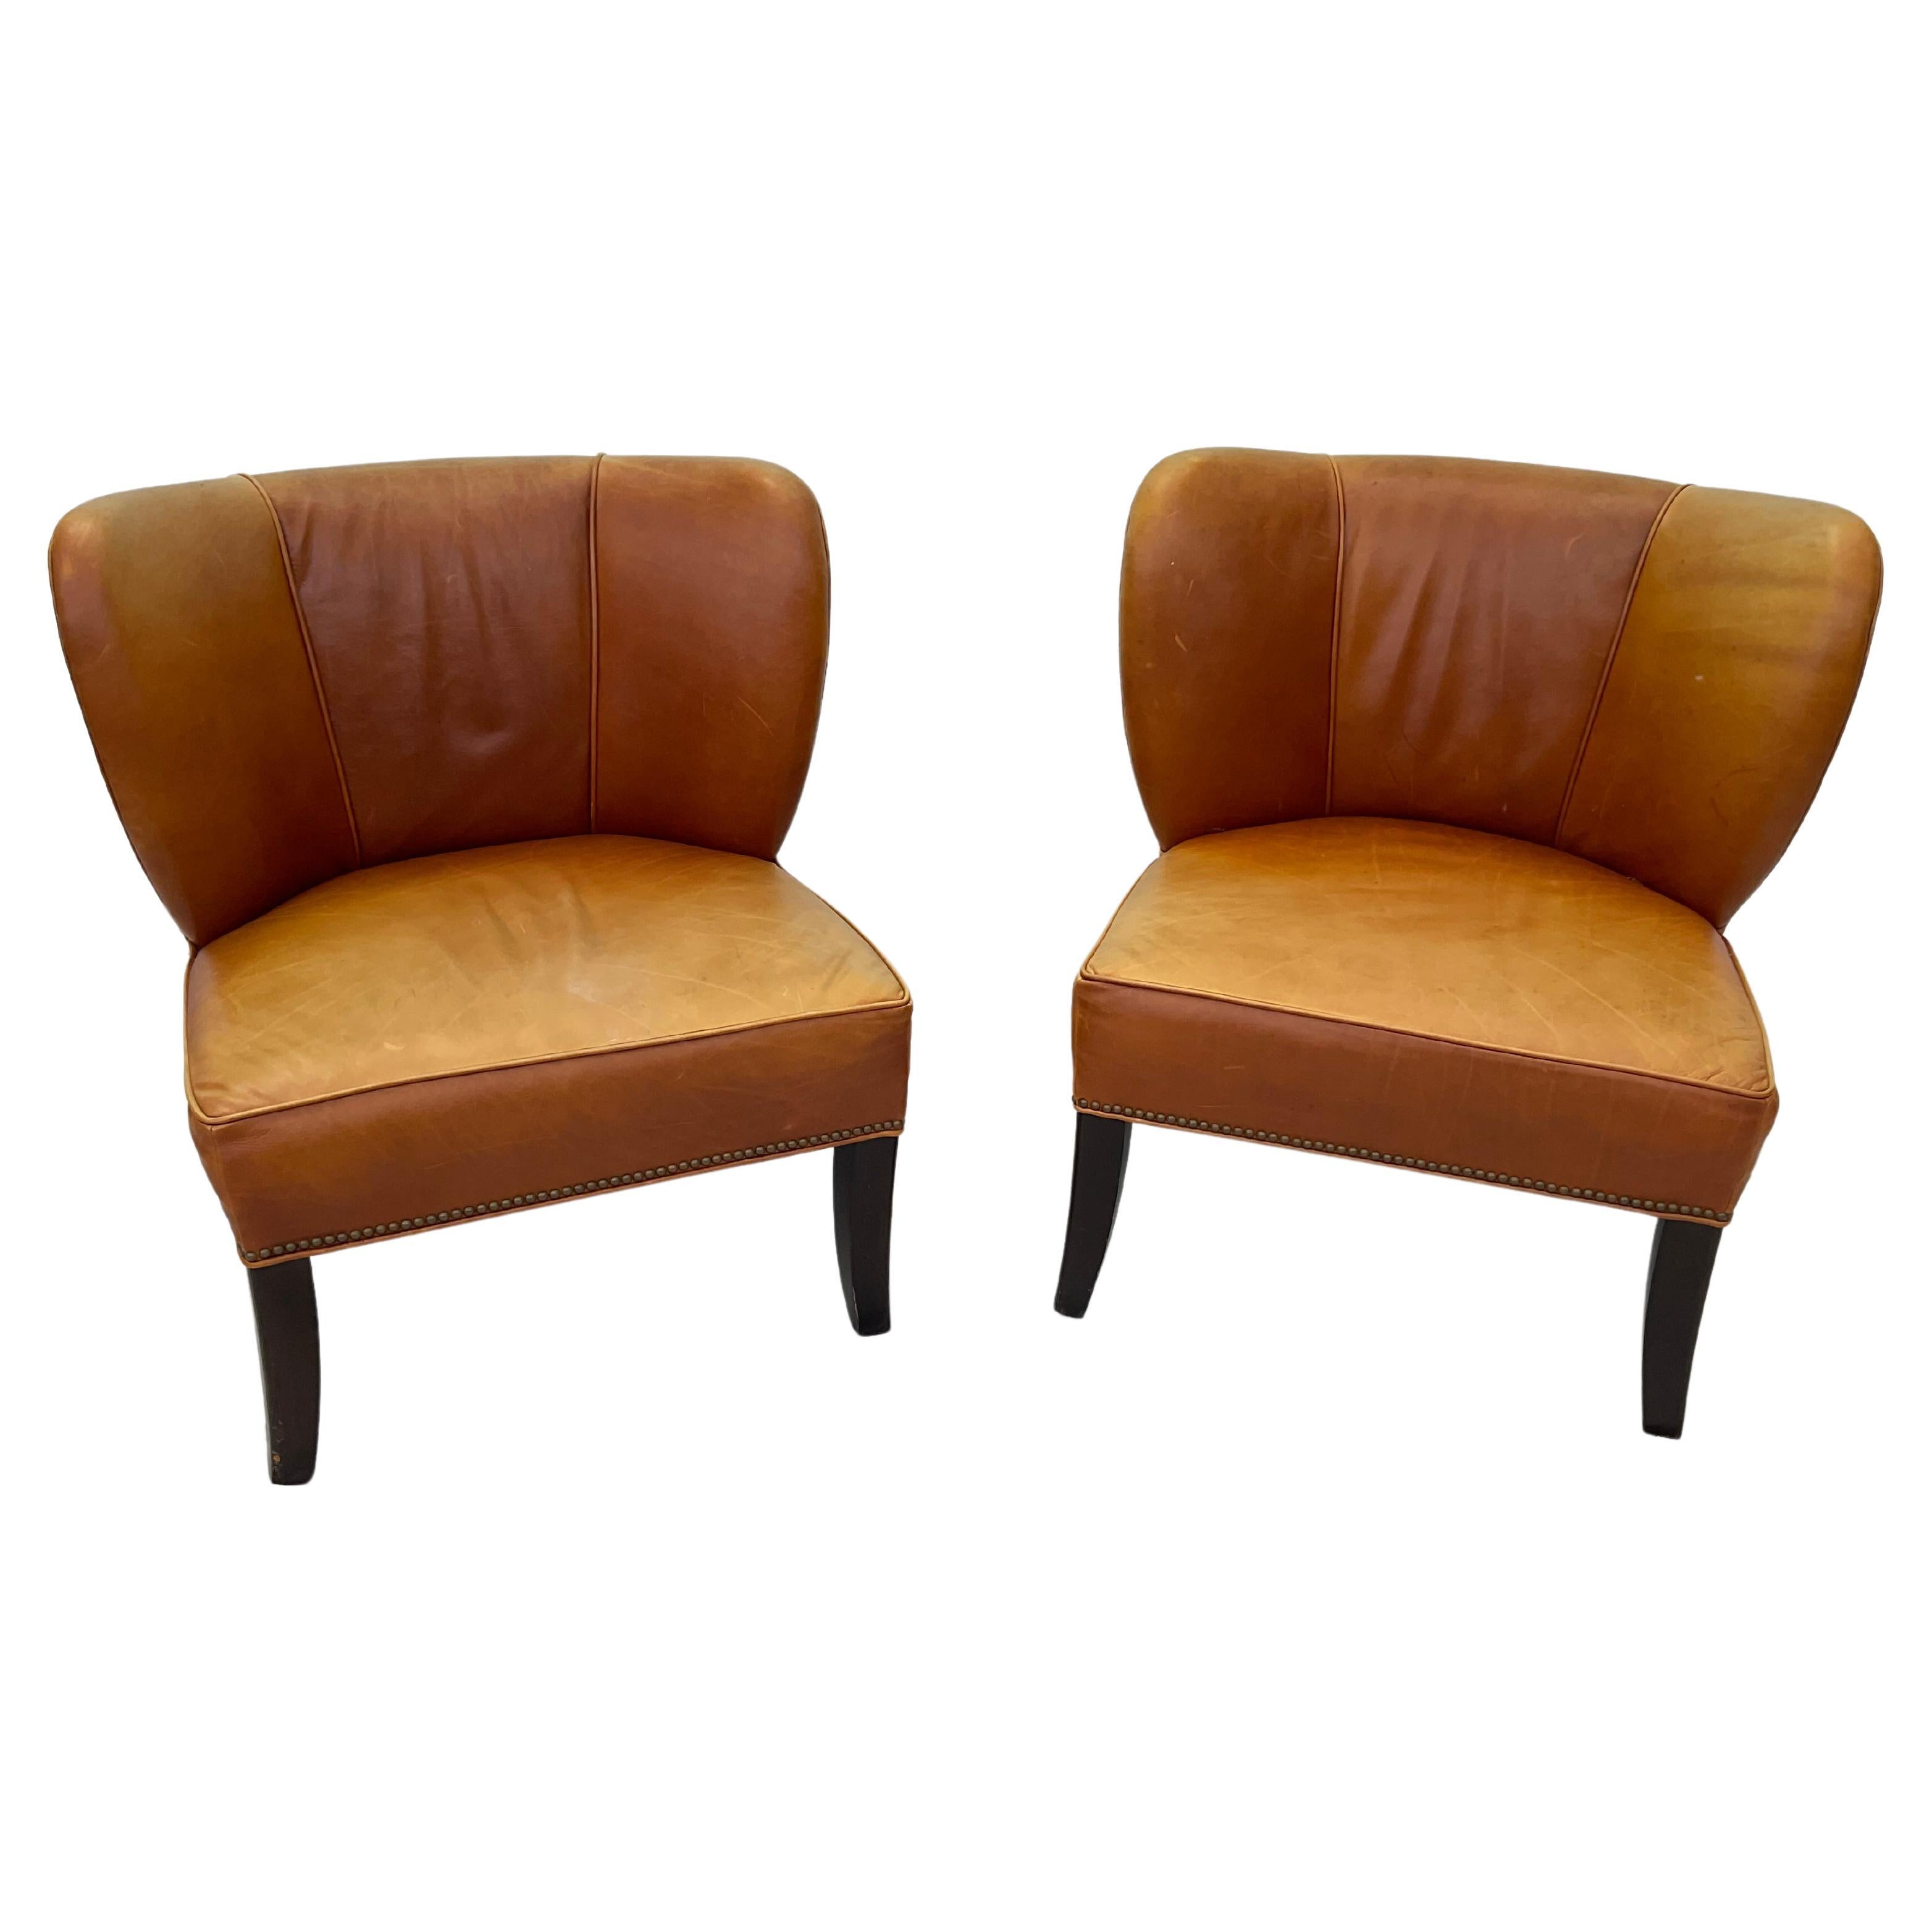 Handsome pair of Arhaus Italian leather lounge chairs in a rich amber shade with brass nail head trim on ebonized wooden legs. Nice broken in leather in overall good condition. Top grain Italian leather, craftsman-built by artisans in North